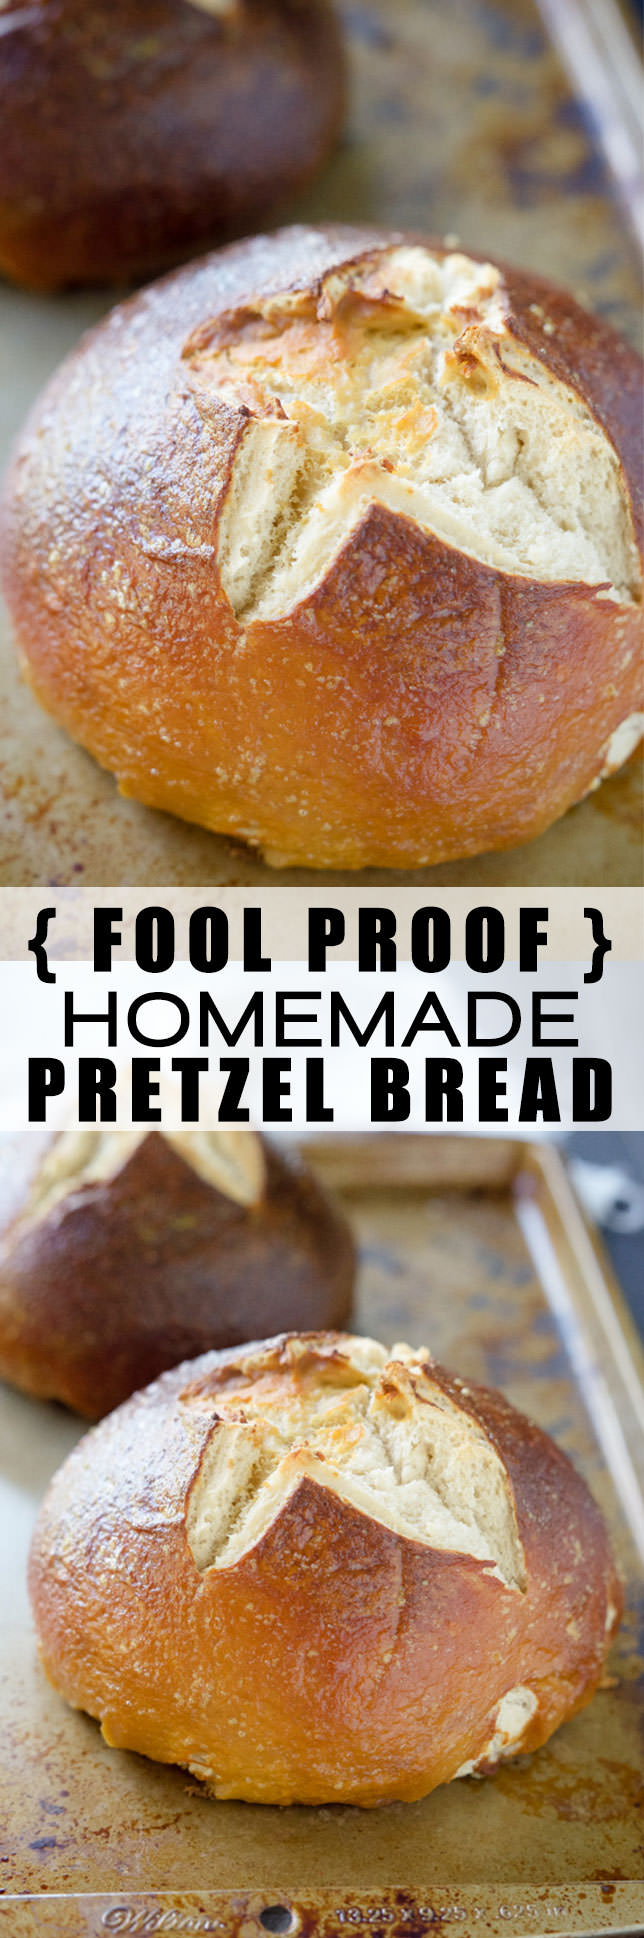 This Fool Proof Homemade Pretzel Bread has a salty and crispy crust with a tender inside! Making it the perfect bread for sandwiches or for dunking into your favorite cheese sauce!